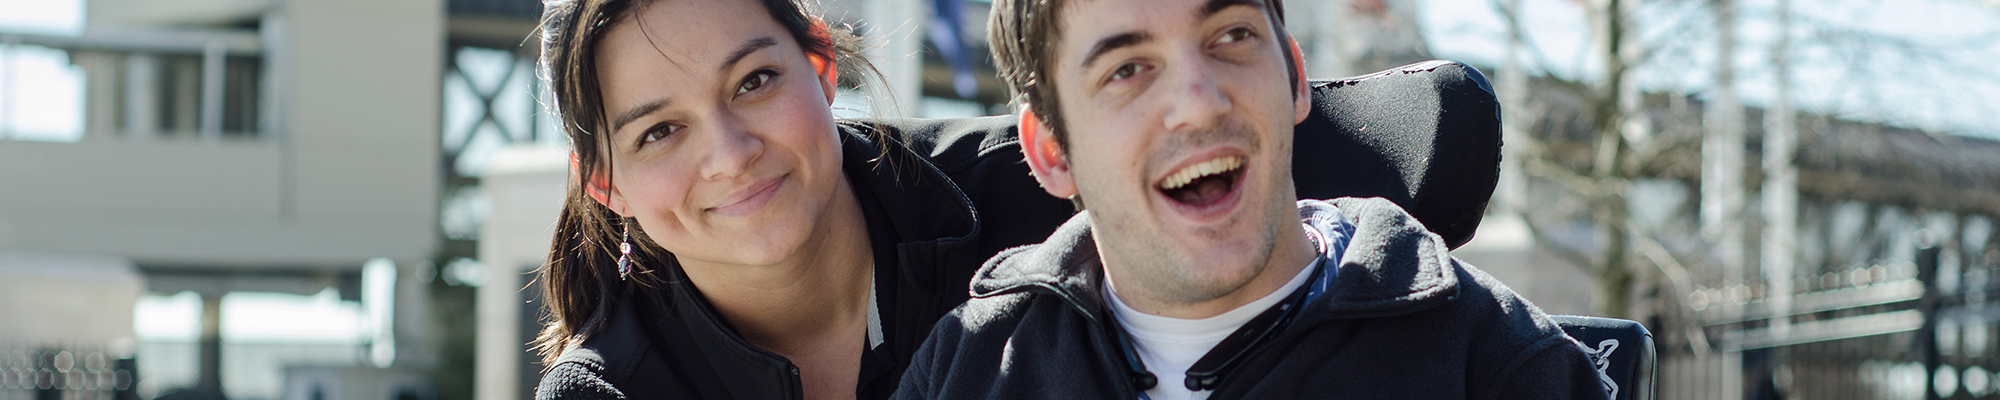 Woman and man with visible disabilites smile at the camera outside